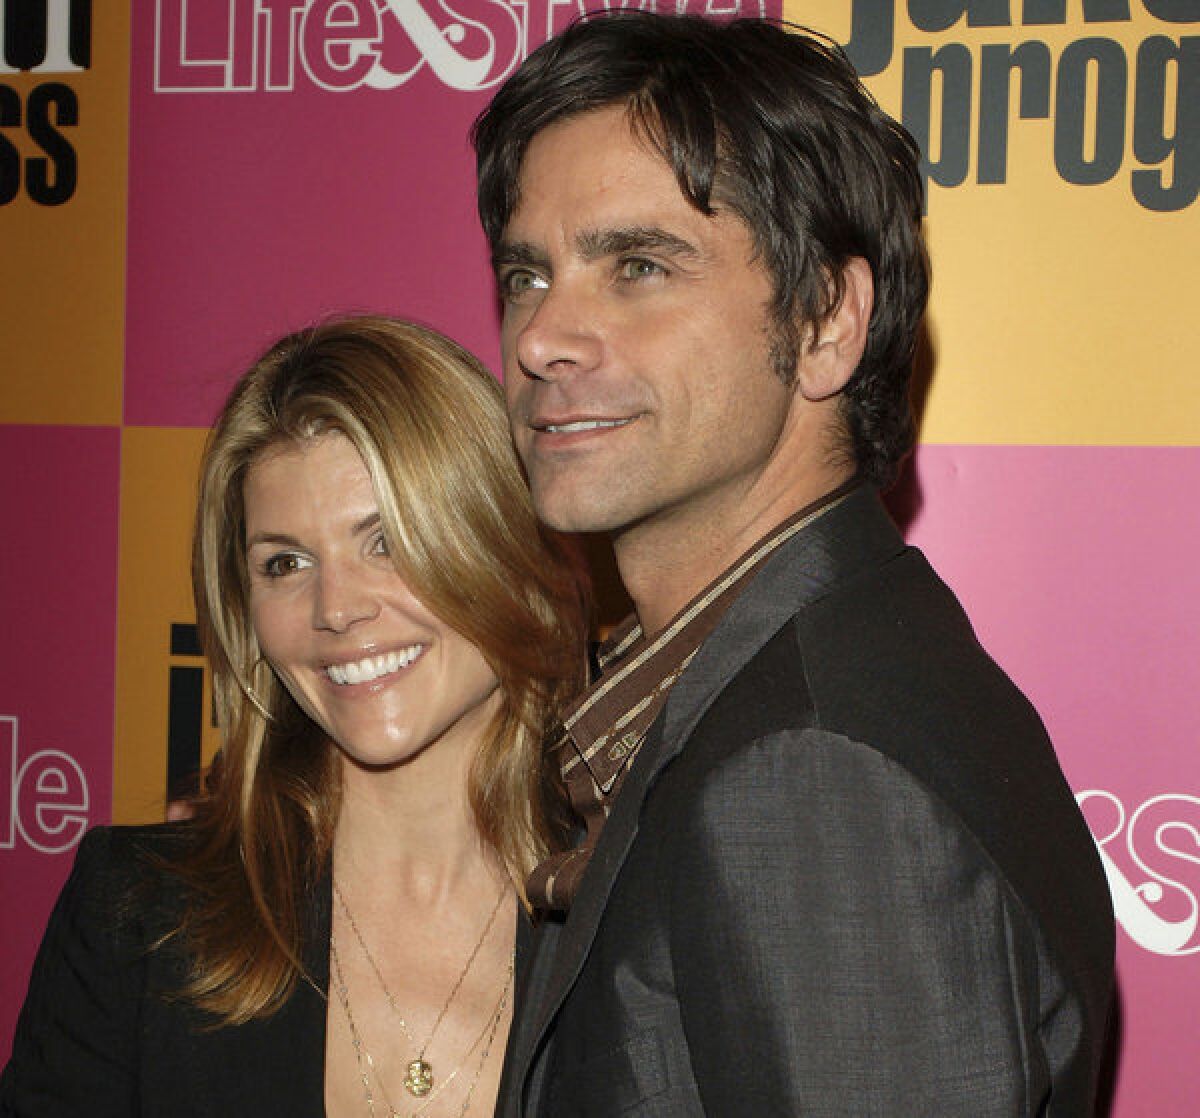 "Full House" stars Lori Loughlin and John Stamos, shown in 2006, said their romance "timing was off" while filming their sitcom.